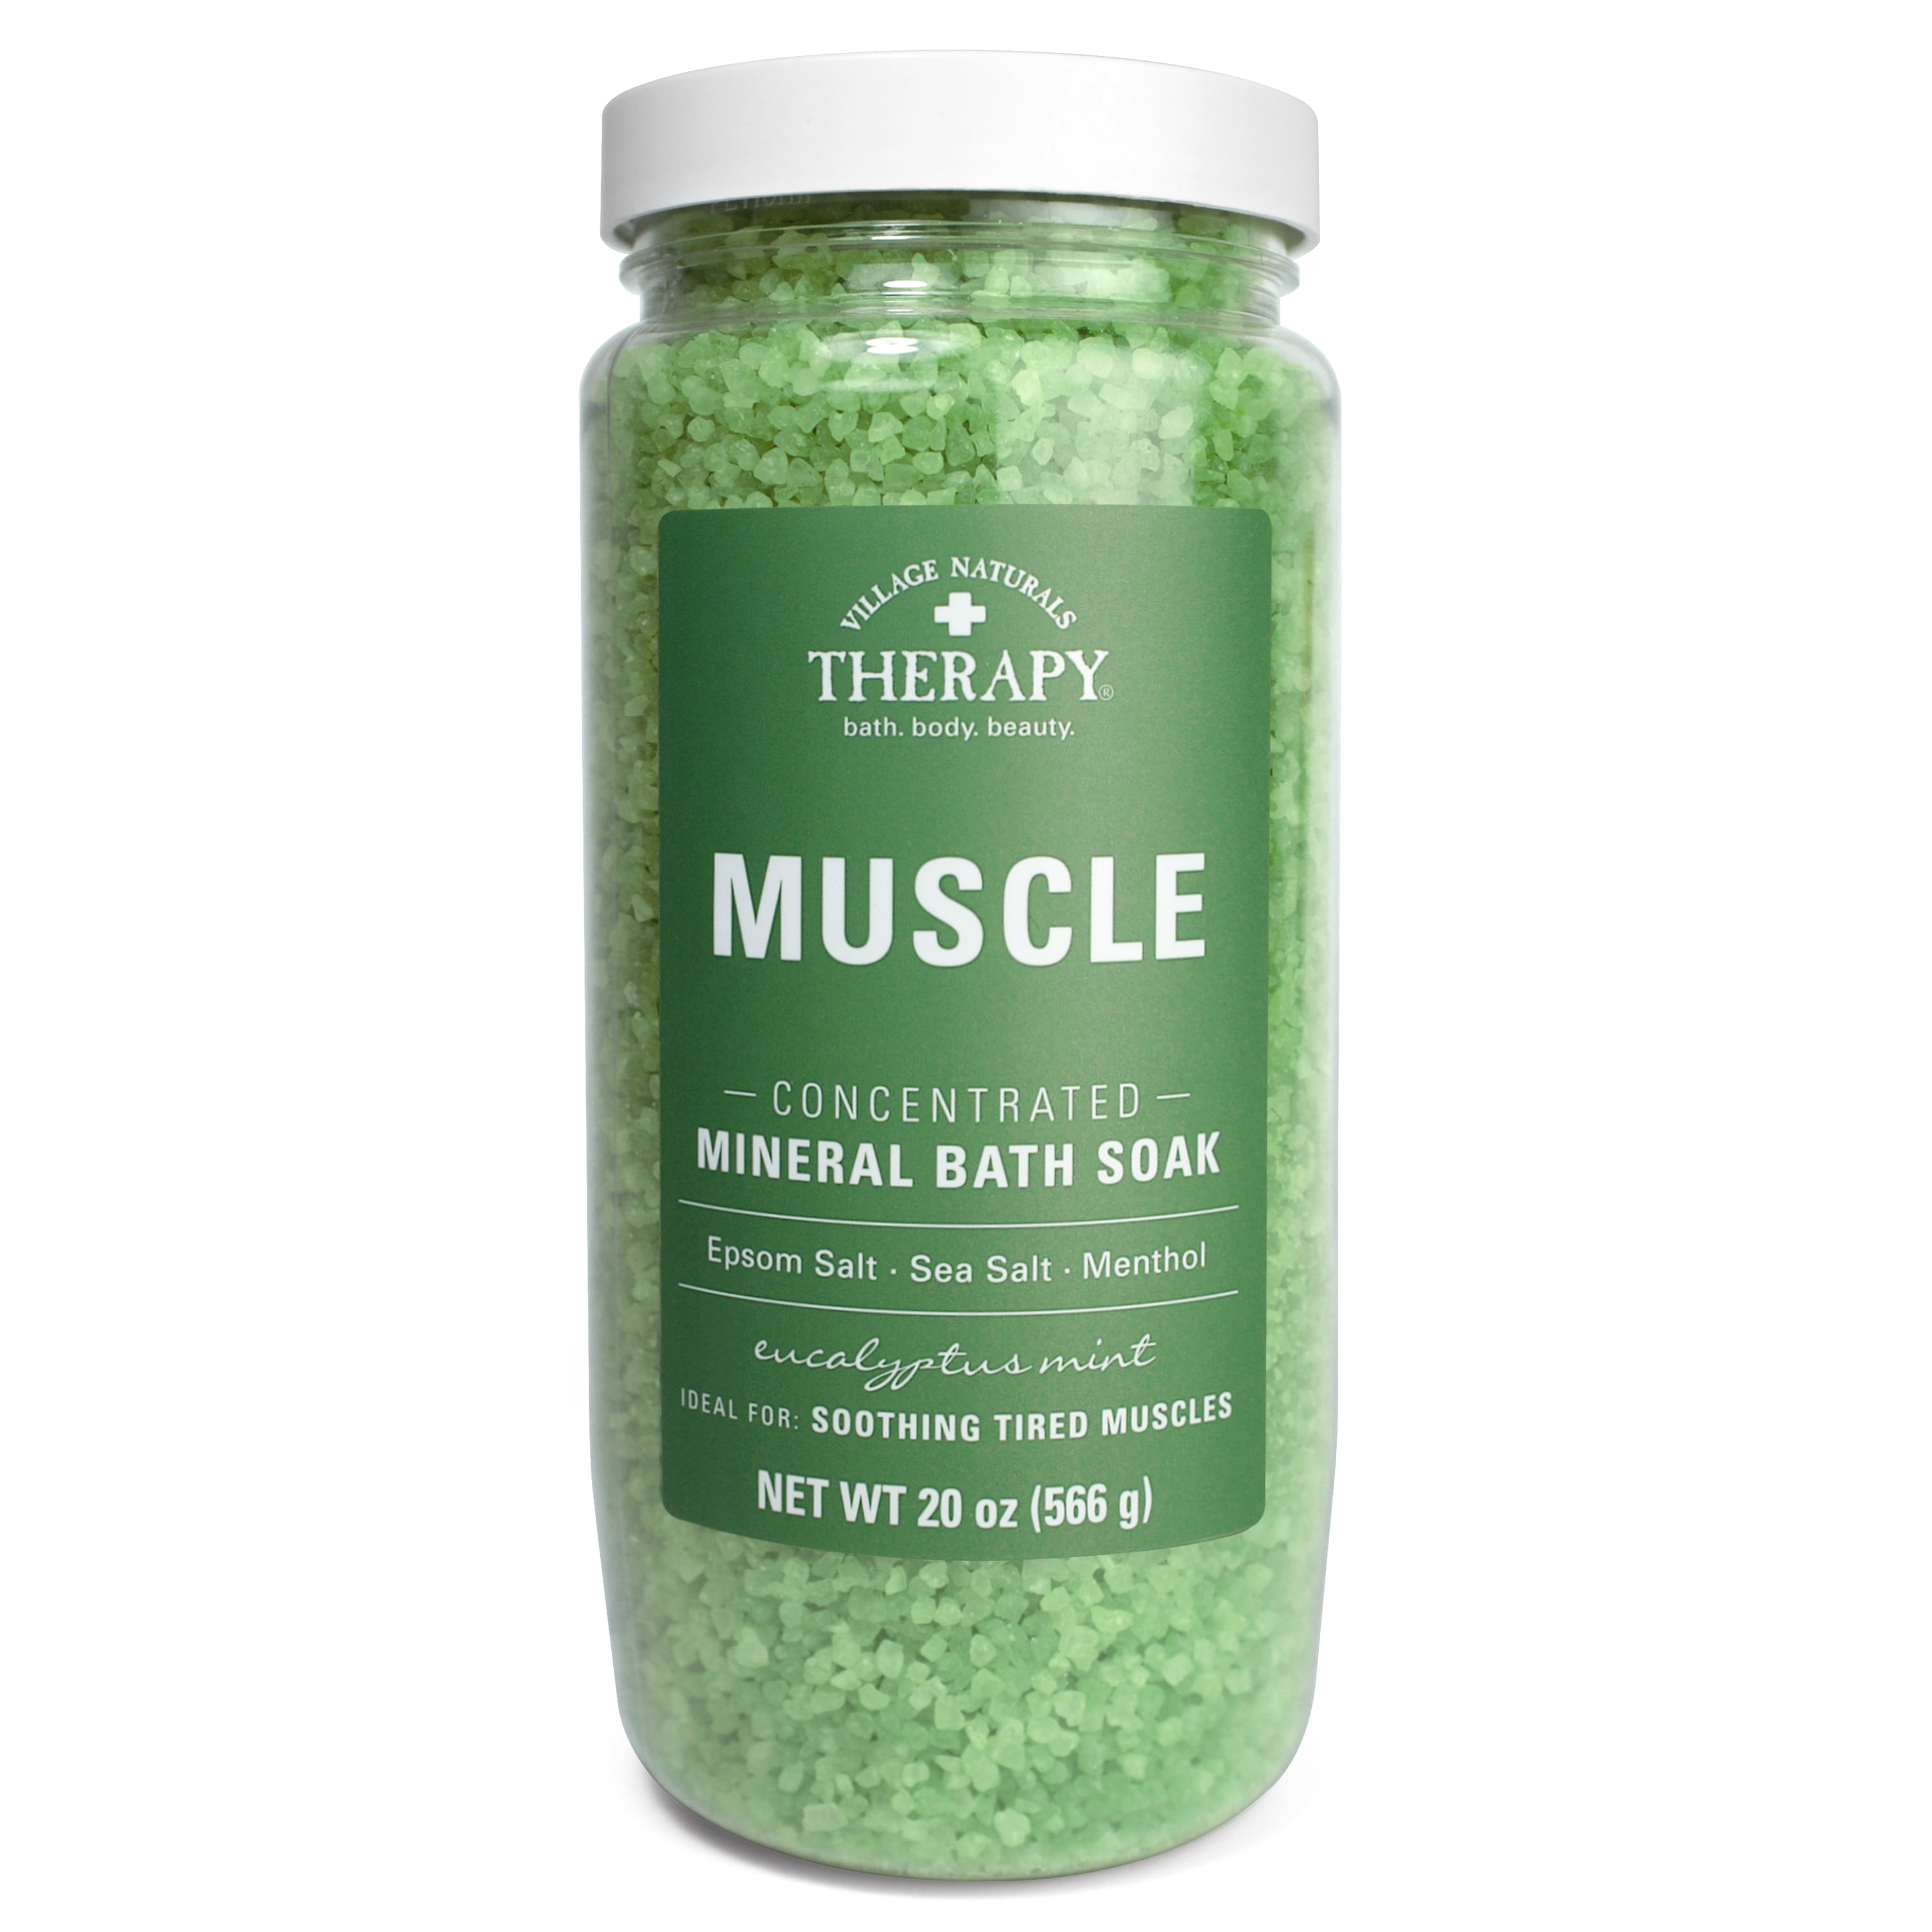 Village Naturals Therapy Aches & Pains Muscle Relief Mineral Bath Soak, 20 oz